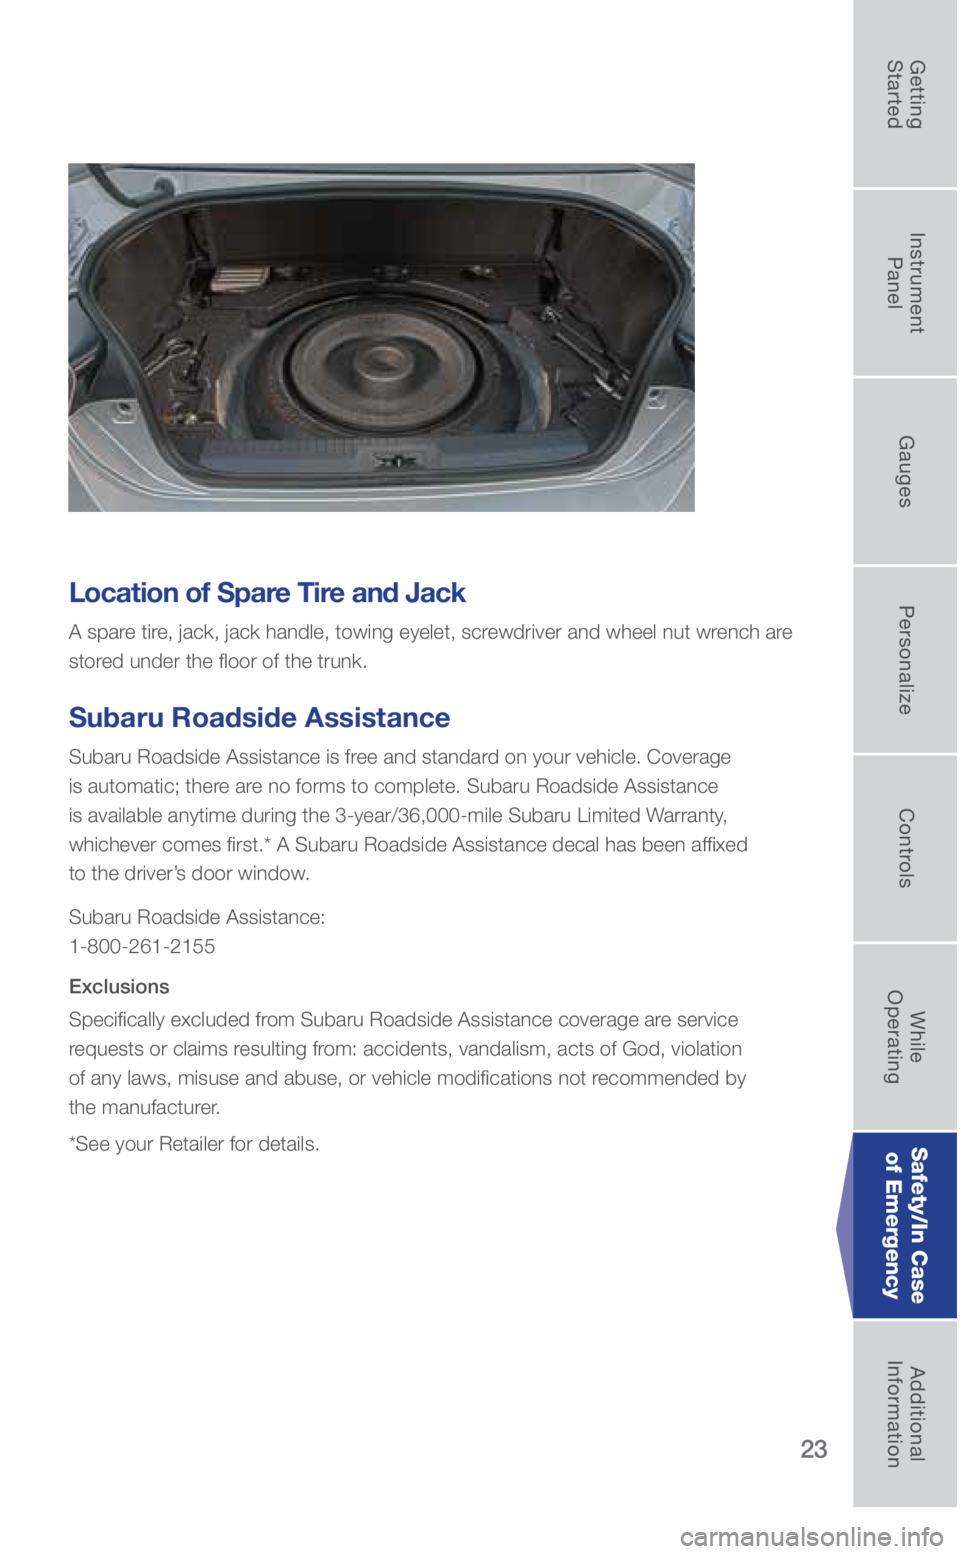 SUBARU BRZ 2019  Quick Guide 23
Location of Spare Tire and Jack
A spare tire, jack, jack handle, towing eyelet, screwdriver and wheel nut wrench are 
stored under the floor of the trunk.
Subaru Roadside Assistance
Subaru Roadside